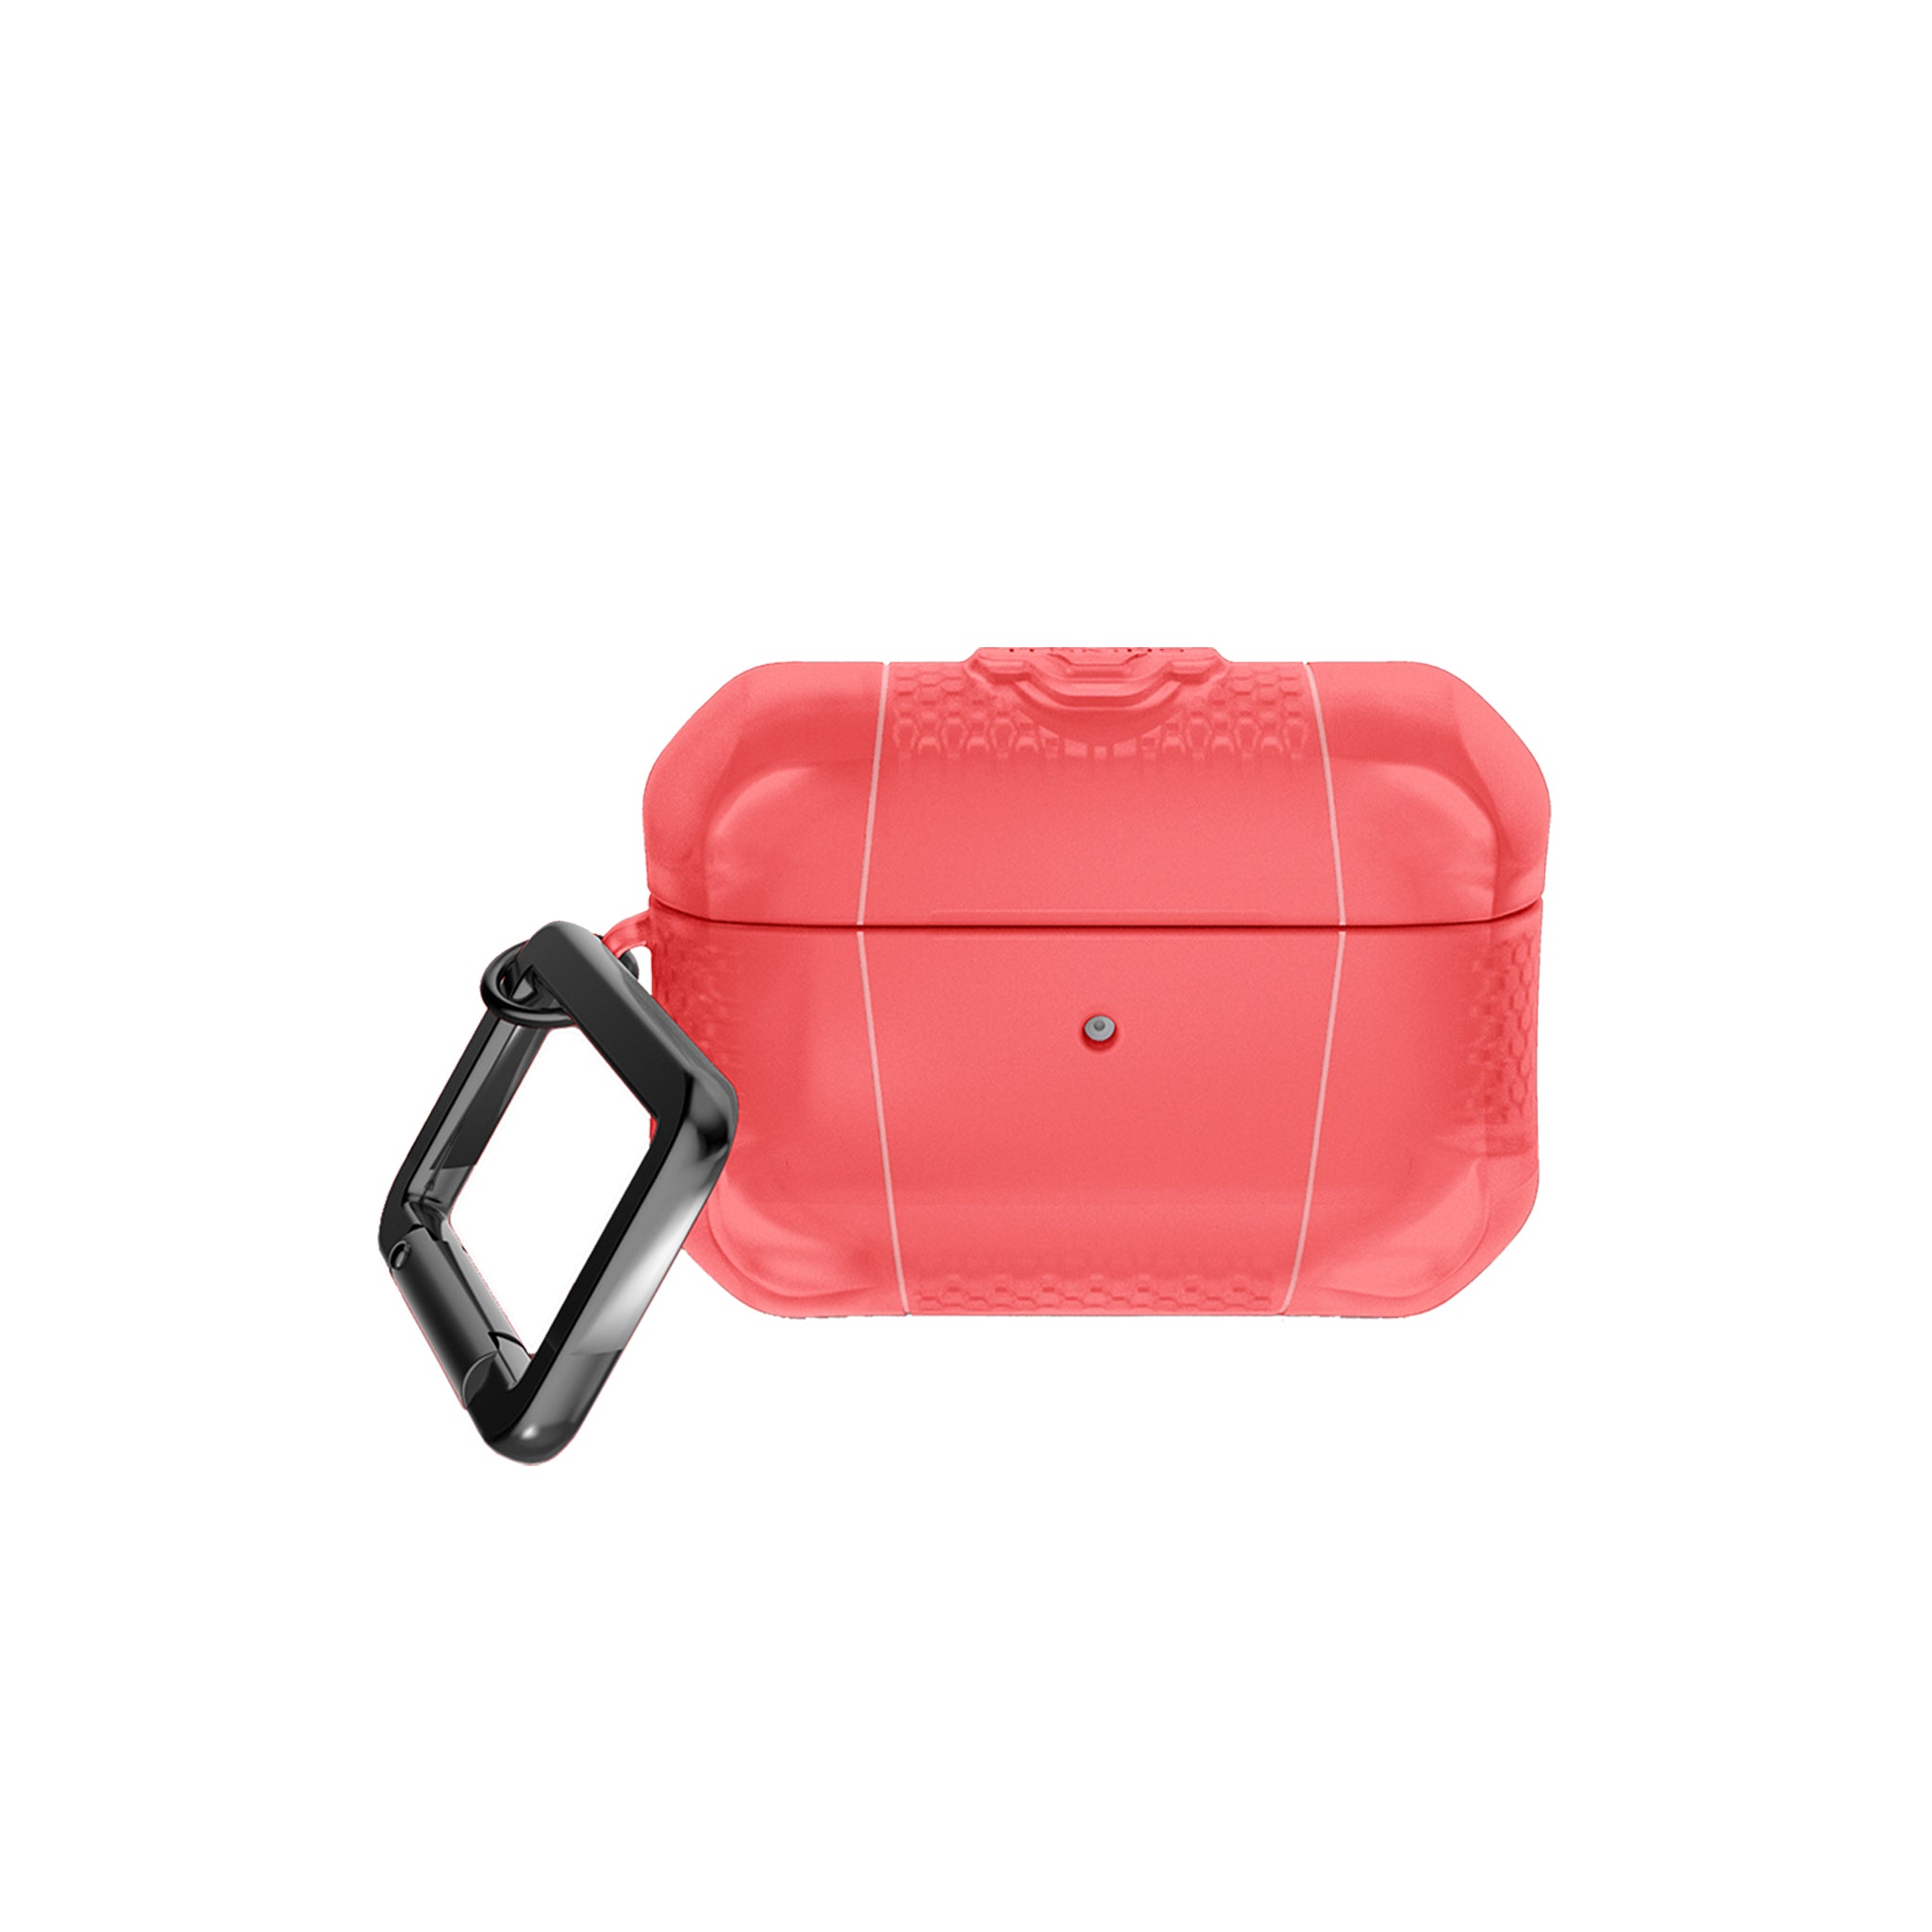 Itskins - Spectrum Frost Case For Apple Airpods Pro - Coral